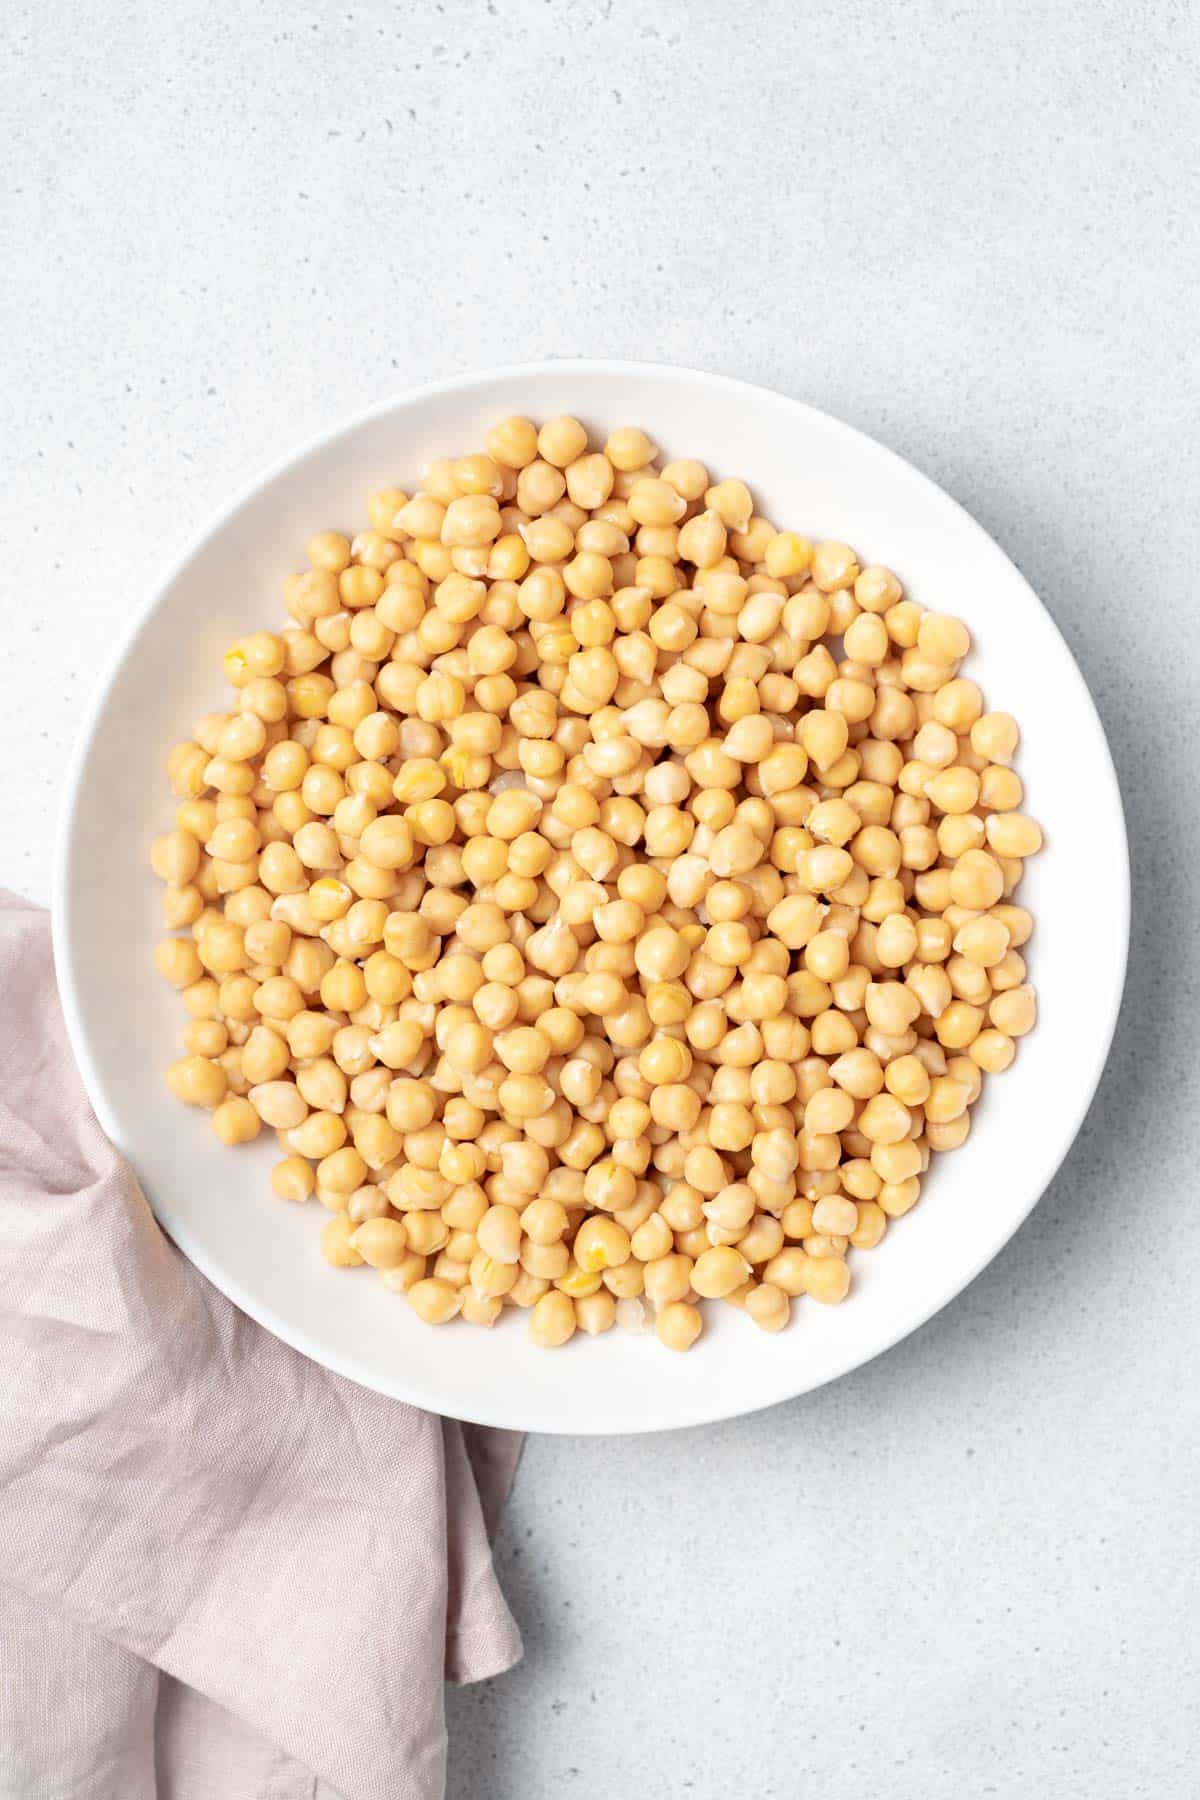 Cooked chickpeas in a white bowl.